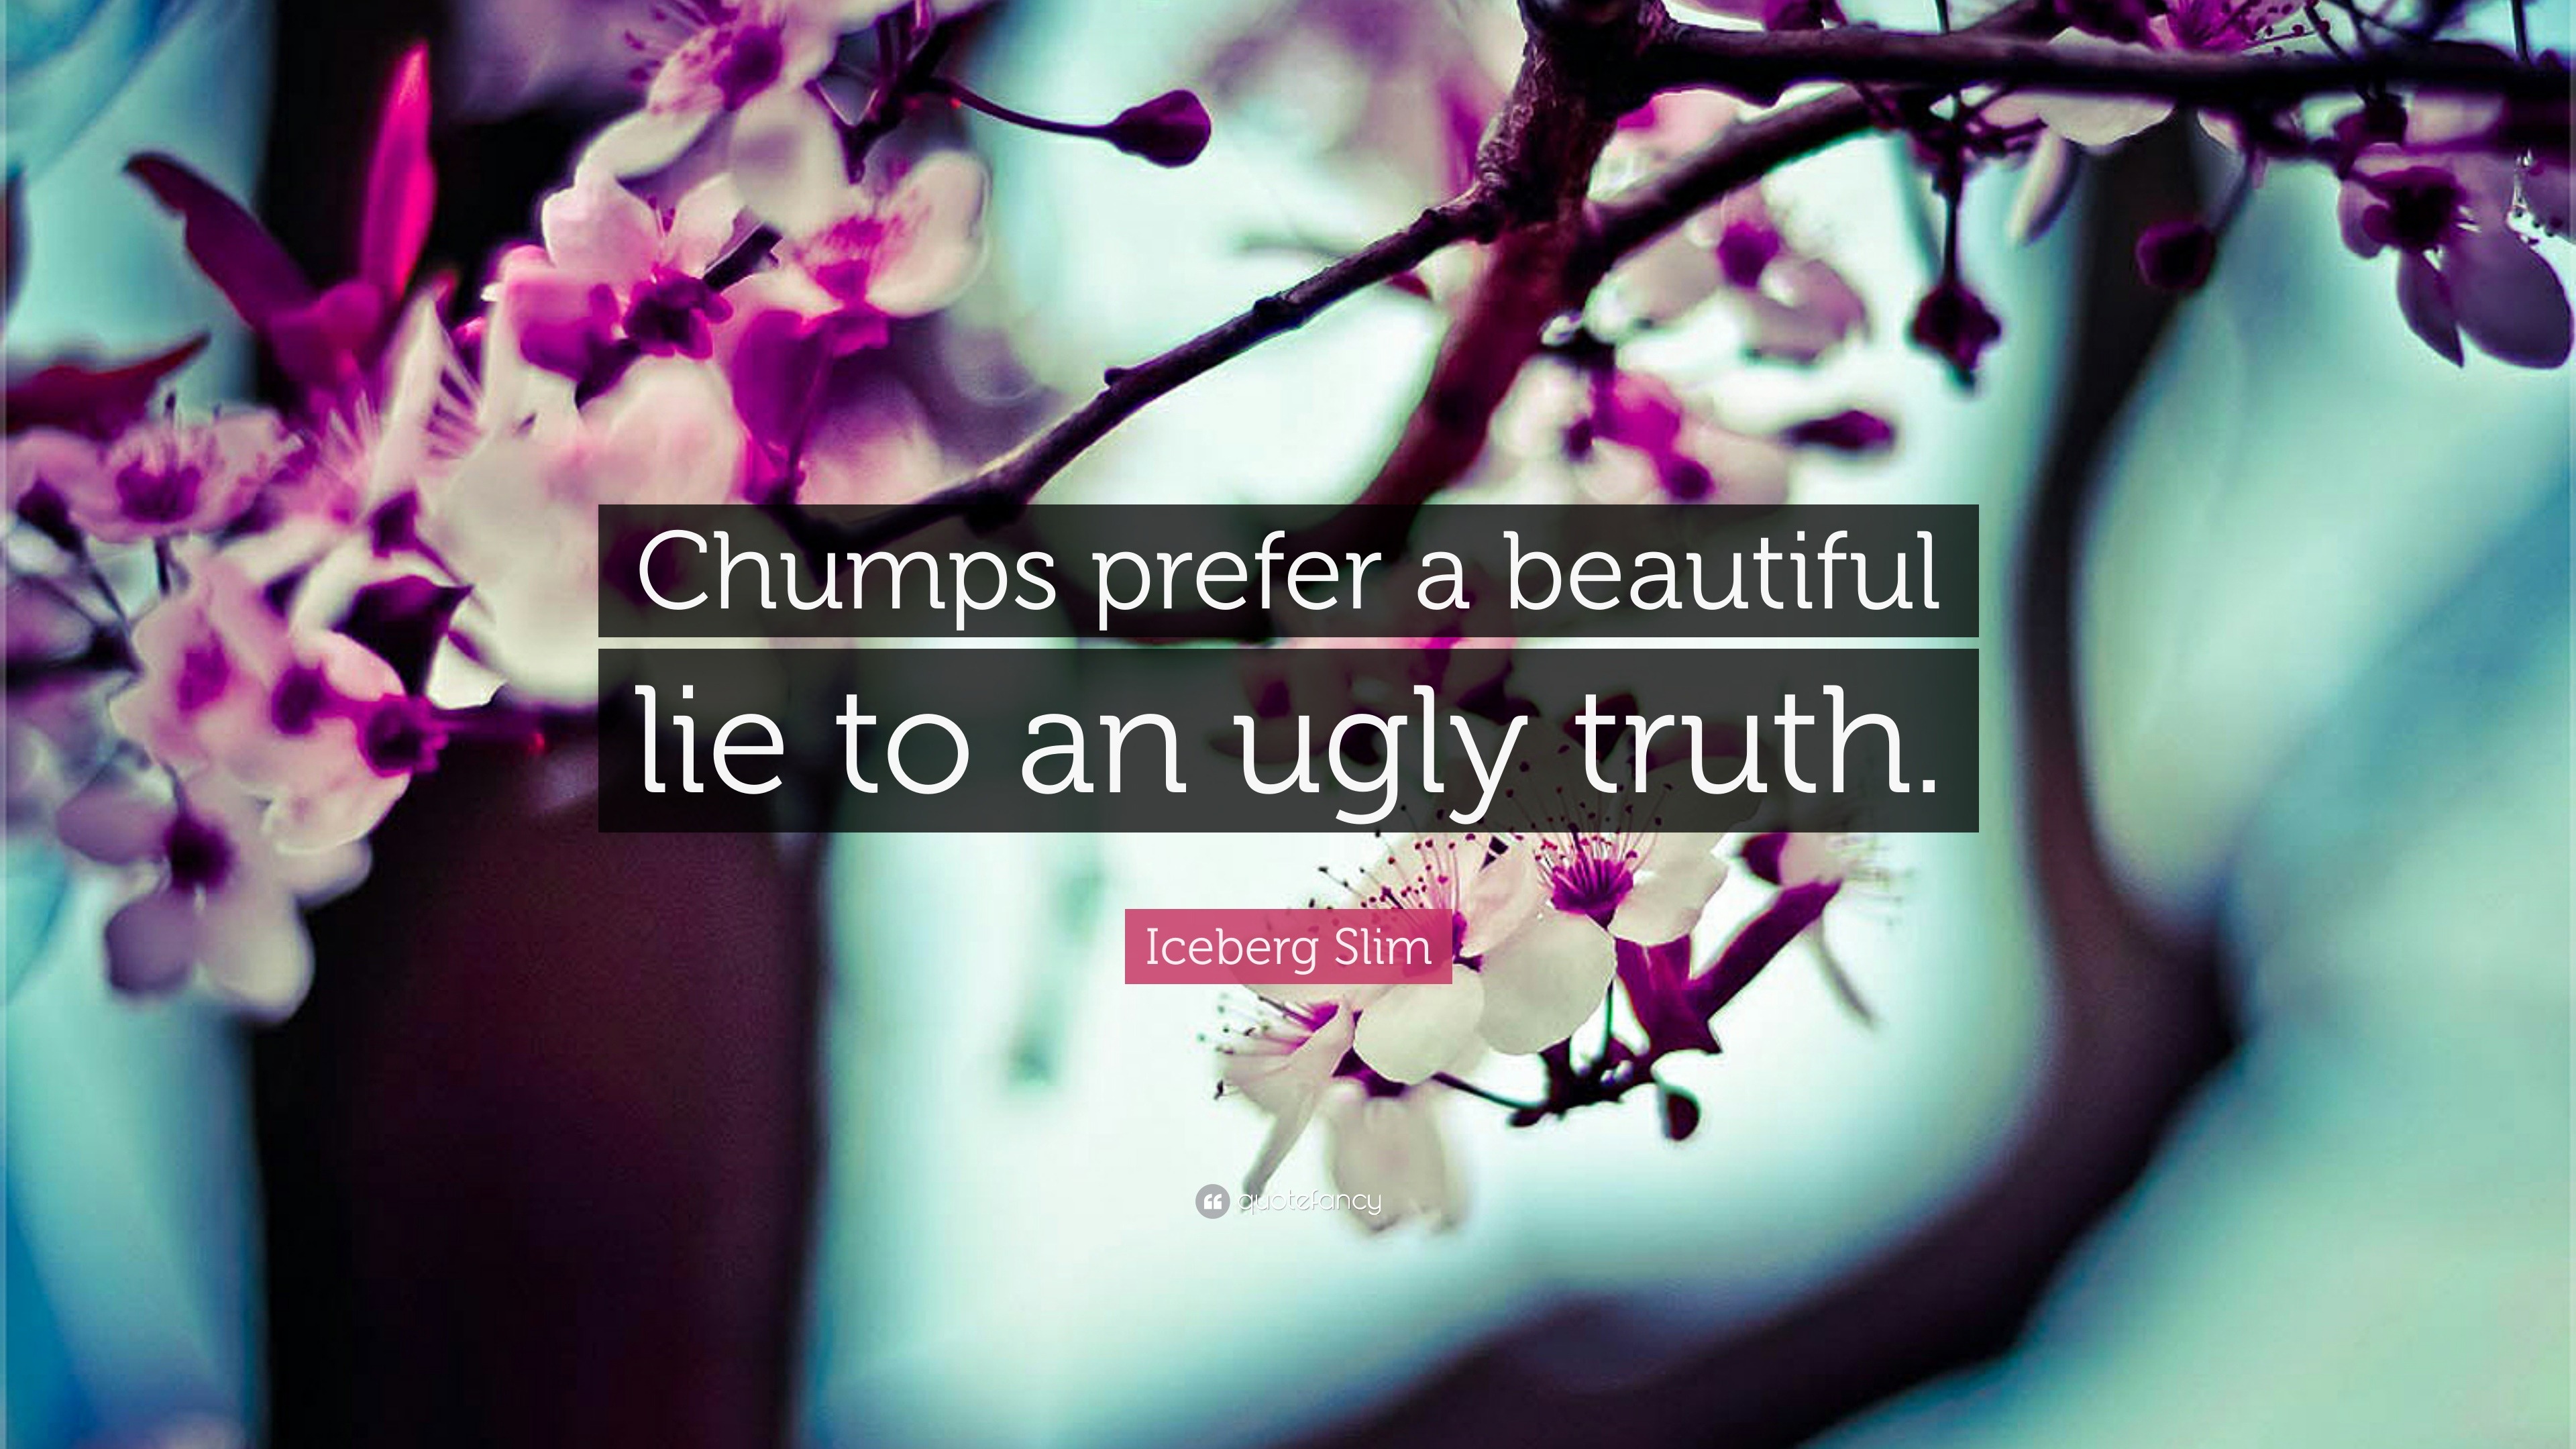 Iceberg Slim Quote: “Chumps prefer a beautiful lie to an ugly truth.”